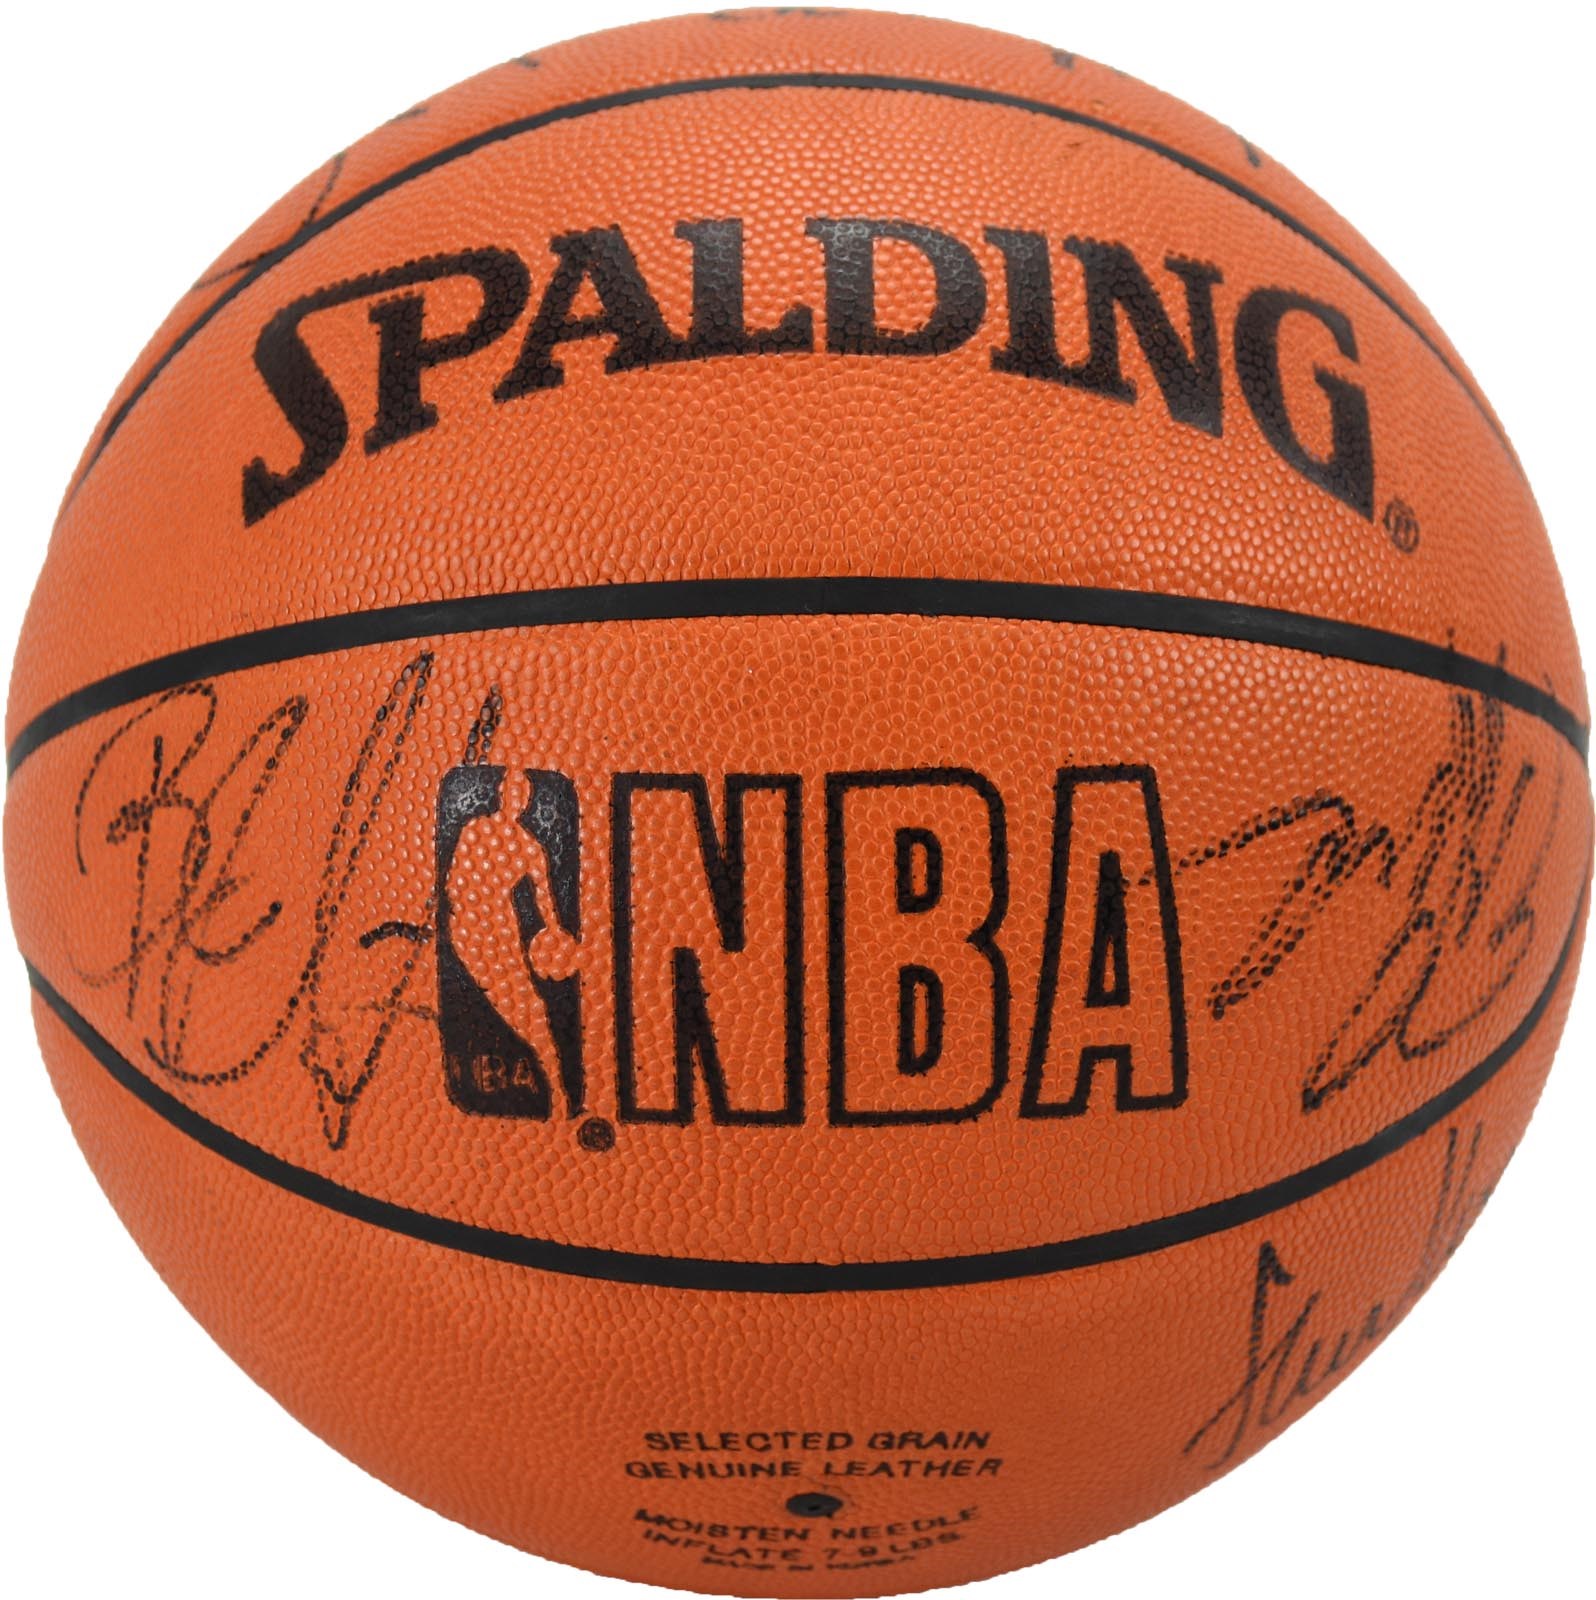 - 1994 NBA 3-Point Contest Used Ball Signed by All Participants